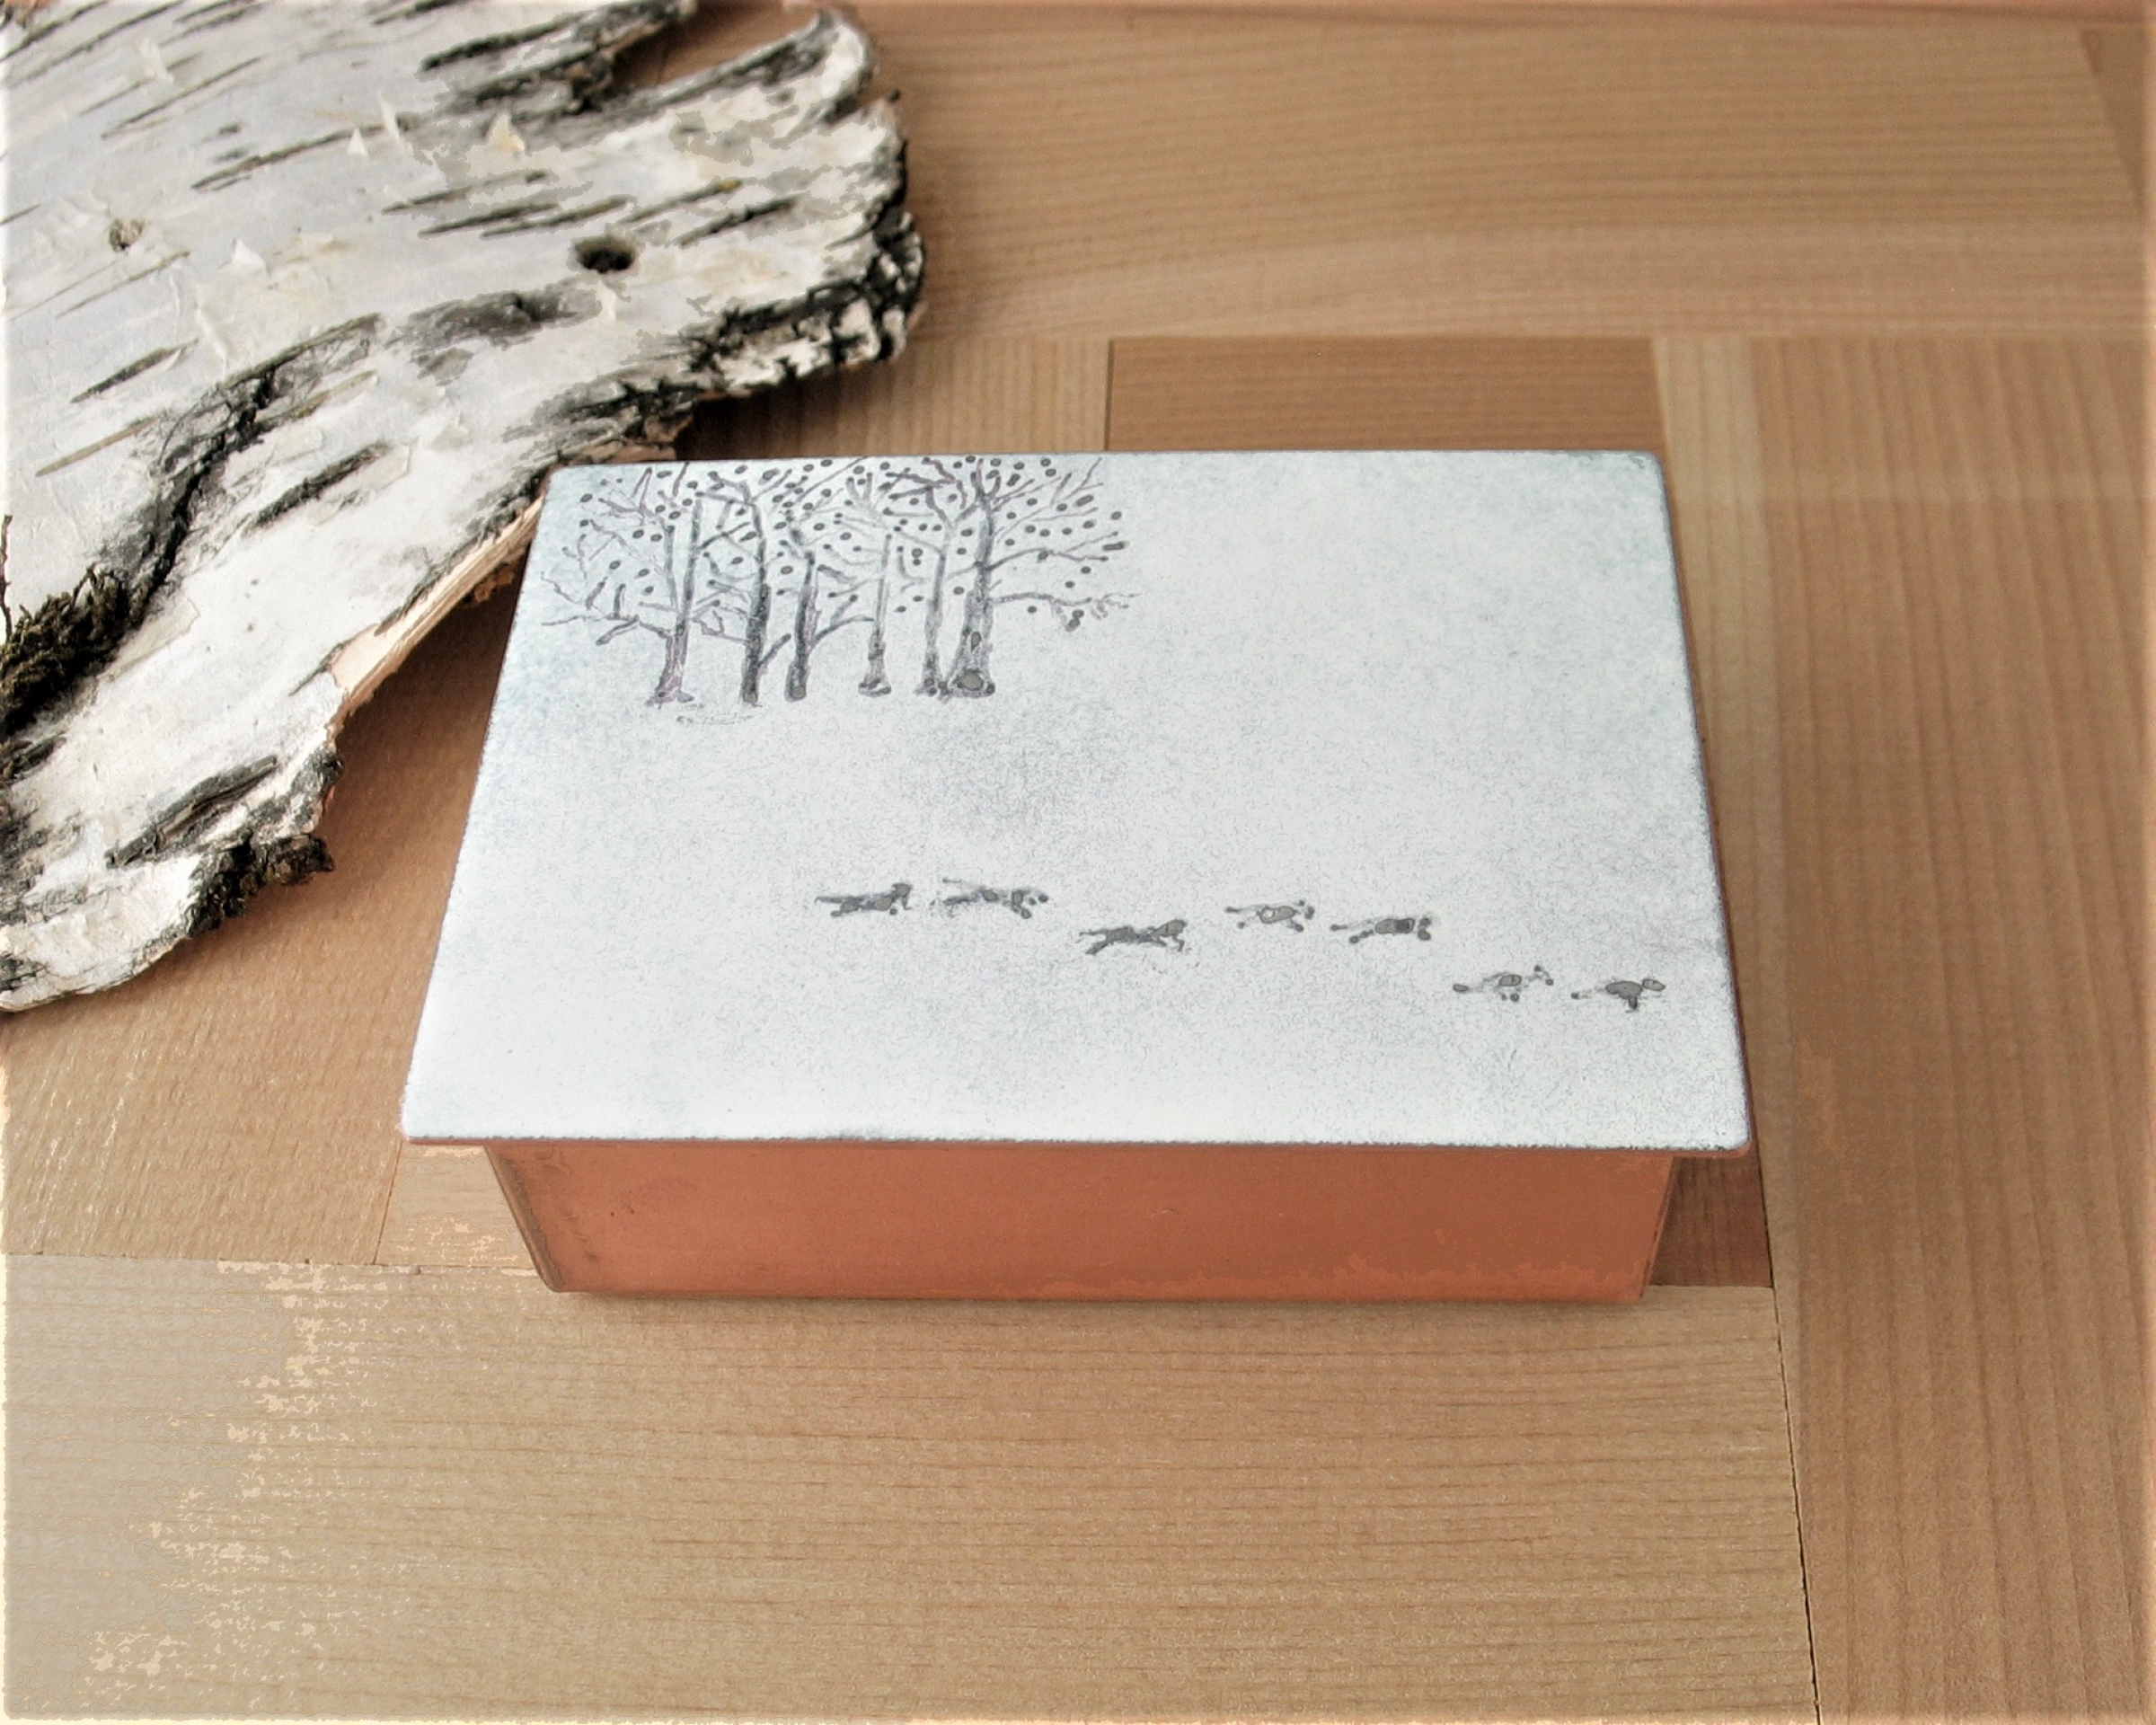 solid copper trinket box 3" x 2" with enameled lid with silhouettes of trees and running wolves